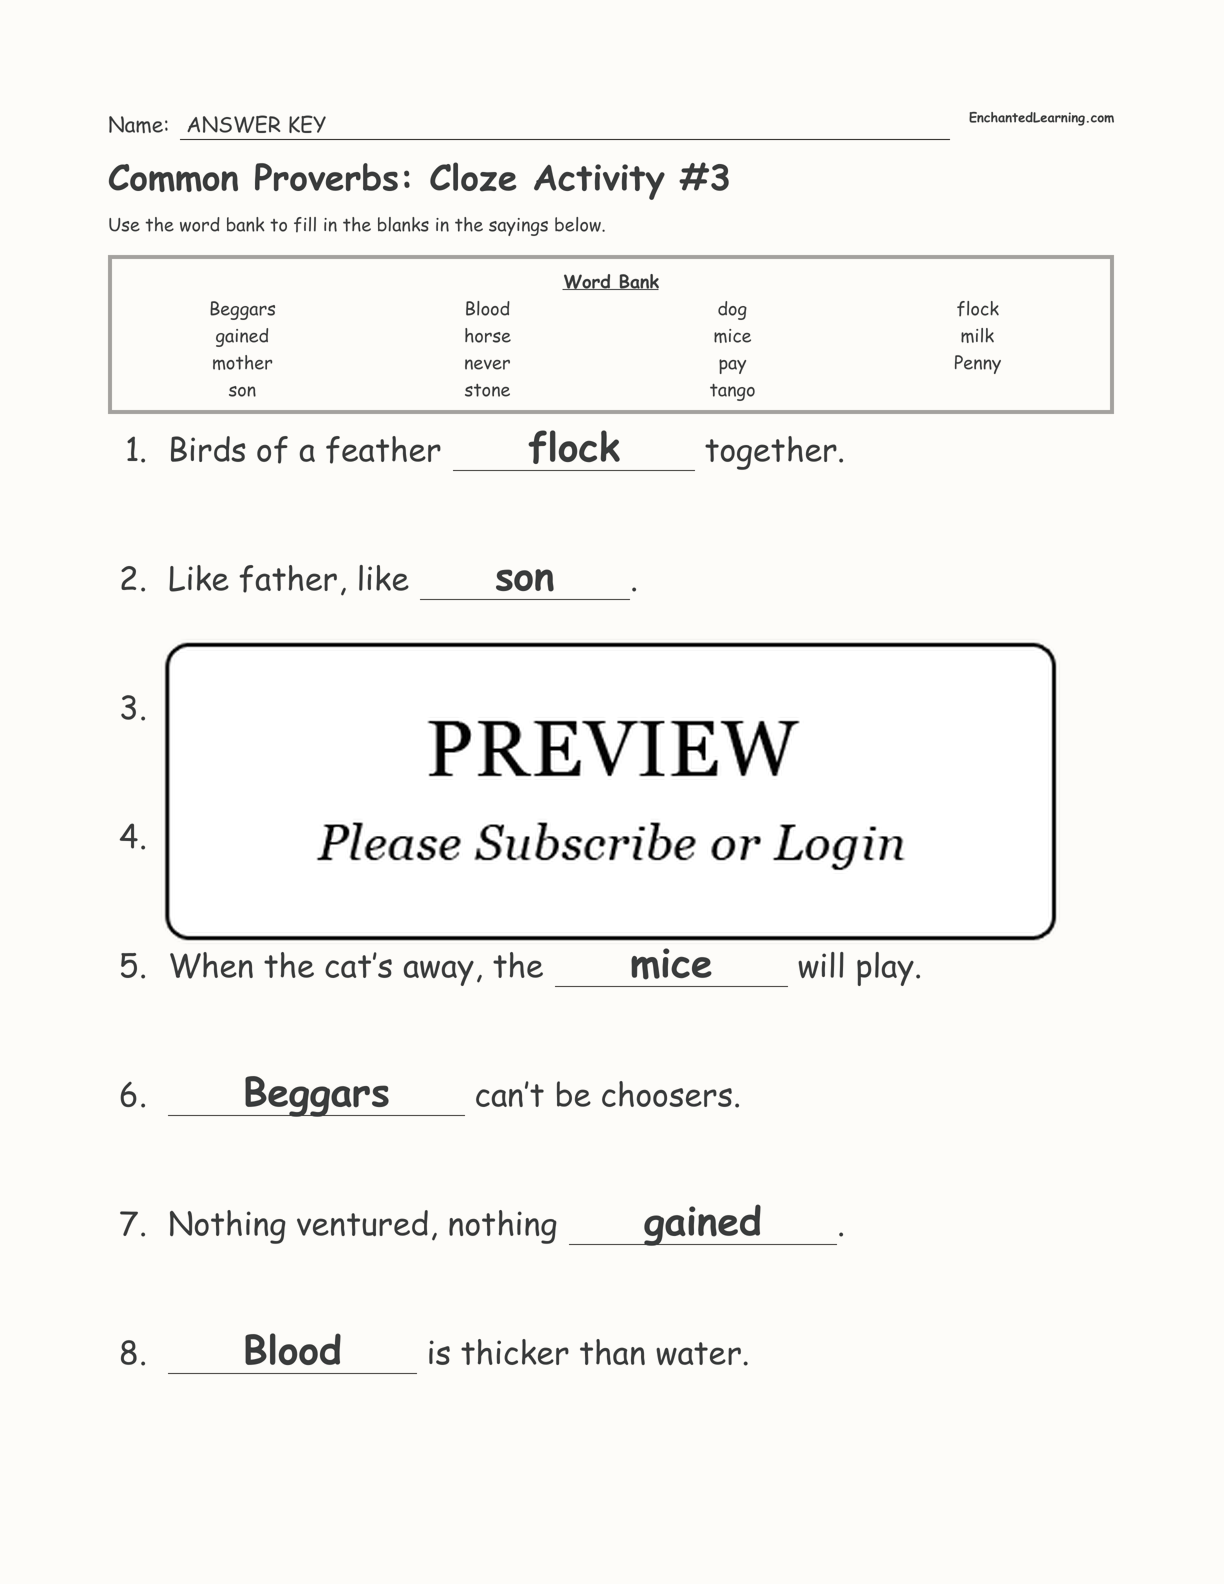 Common Proverbs: Cloze Activity #3 interactive worksheet page 3